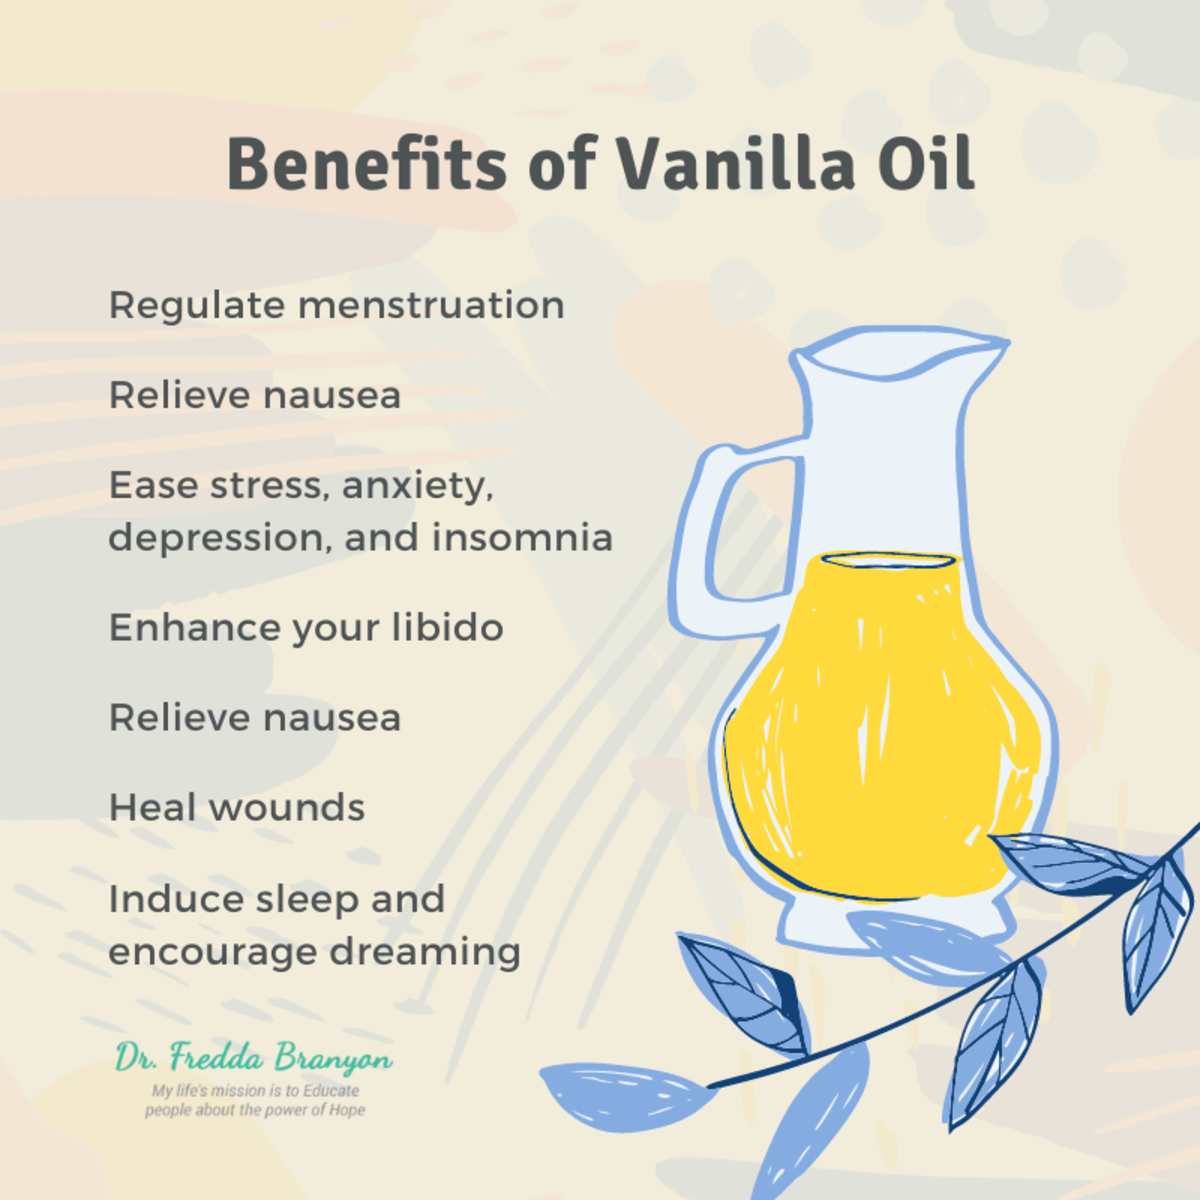 the-delicious-smelling-vanilla-5-amazing-benefits-of-vanilla-oil-for-your-health